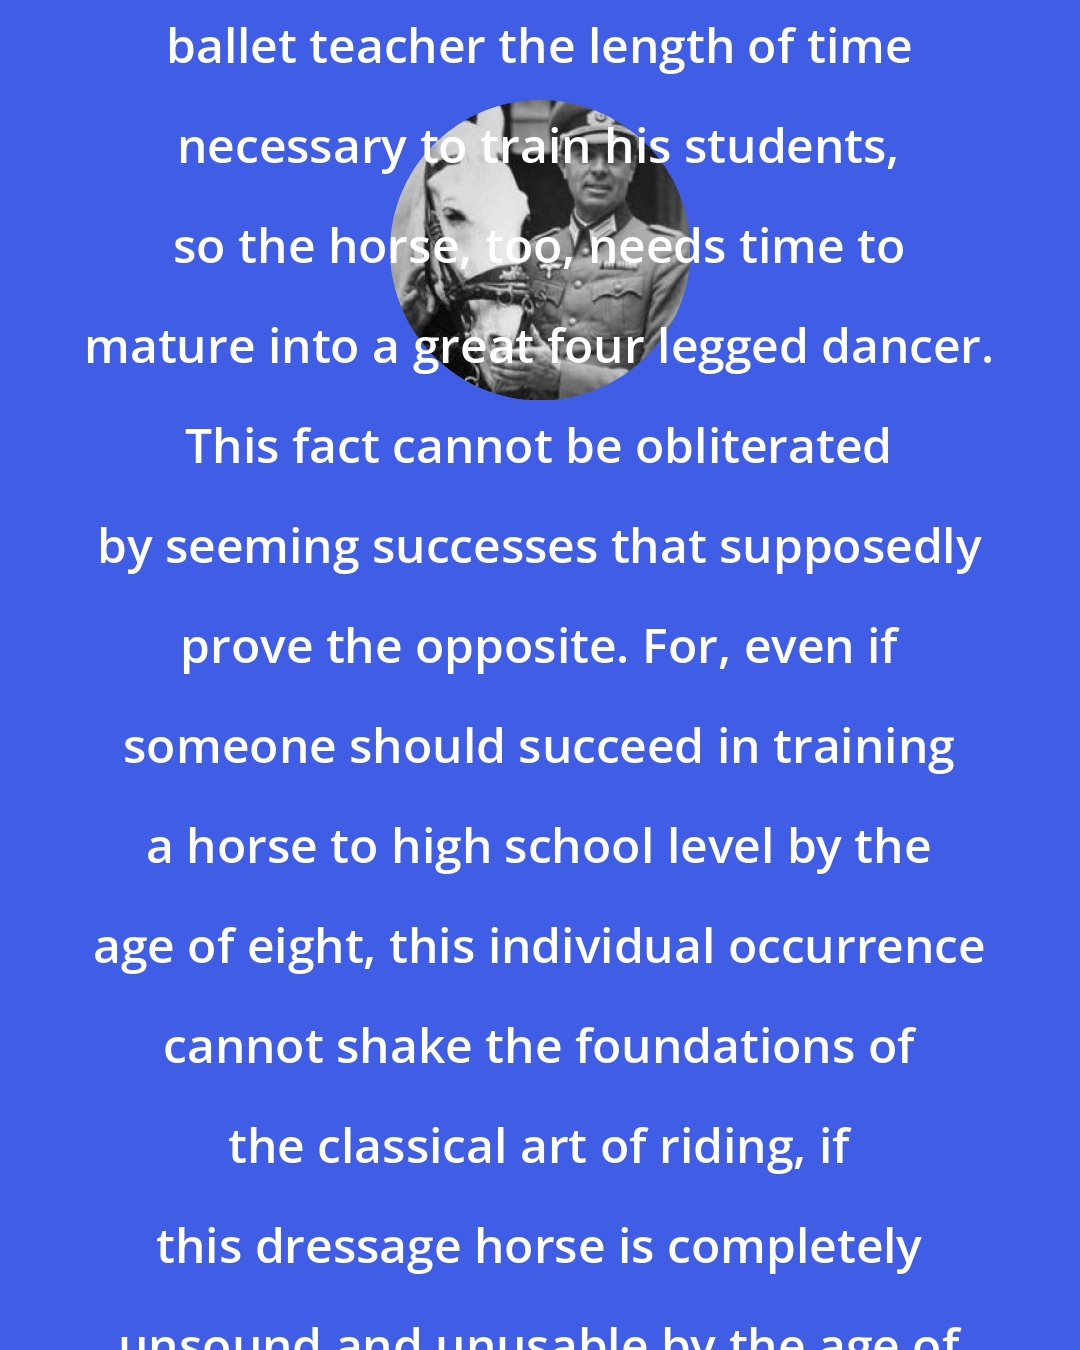 Alois Podhajsky: Just as experience dictates to the ballet teacher the length of time necessary to train his students, so the horse, too, needs time to mature into a great four legged dancer. This fact cannot be obliterated by seeming successes that supposedly prove the opposite. For, even if someone should succeed in training a horse to high school level by the age of eight, this individual occurrence cannot shake the foundations of the classical art of riding, if this dressage horse is completely unsound and unusable by the age of ten.